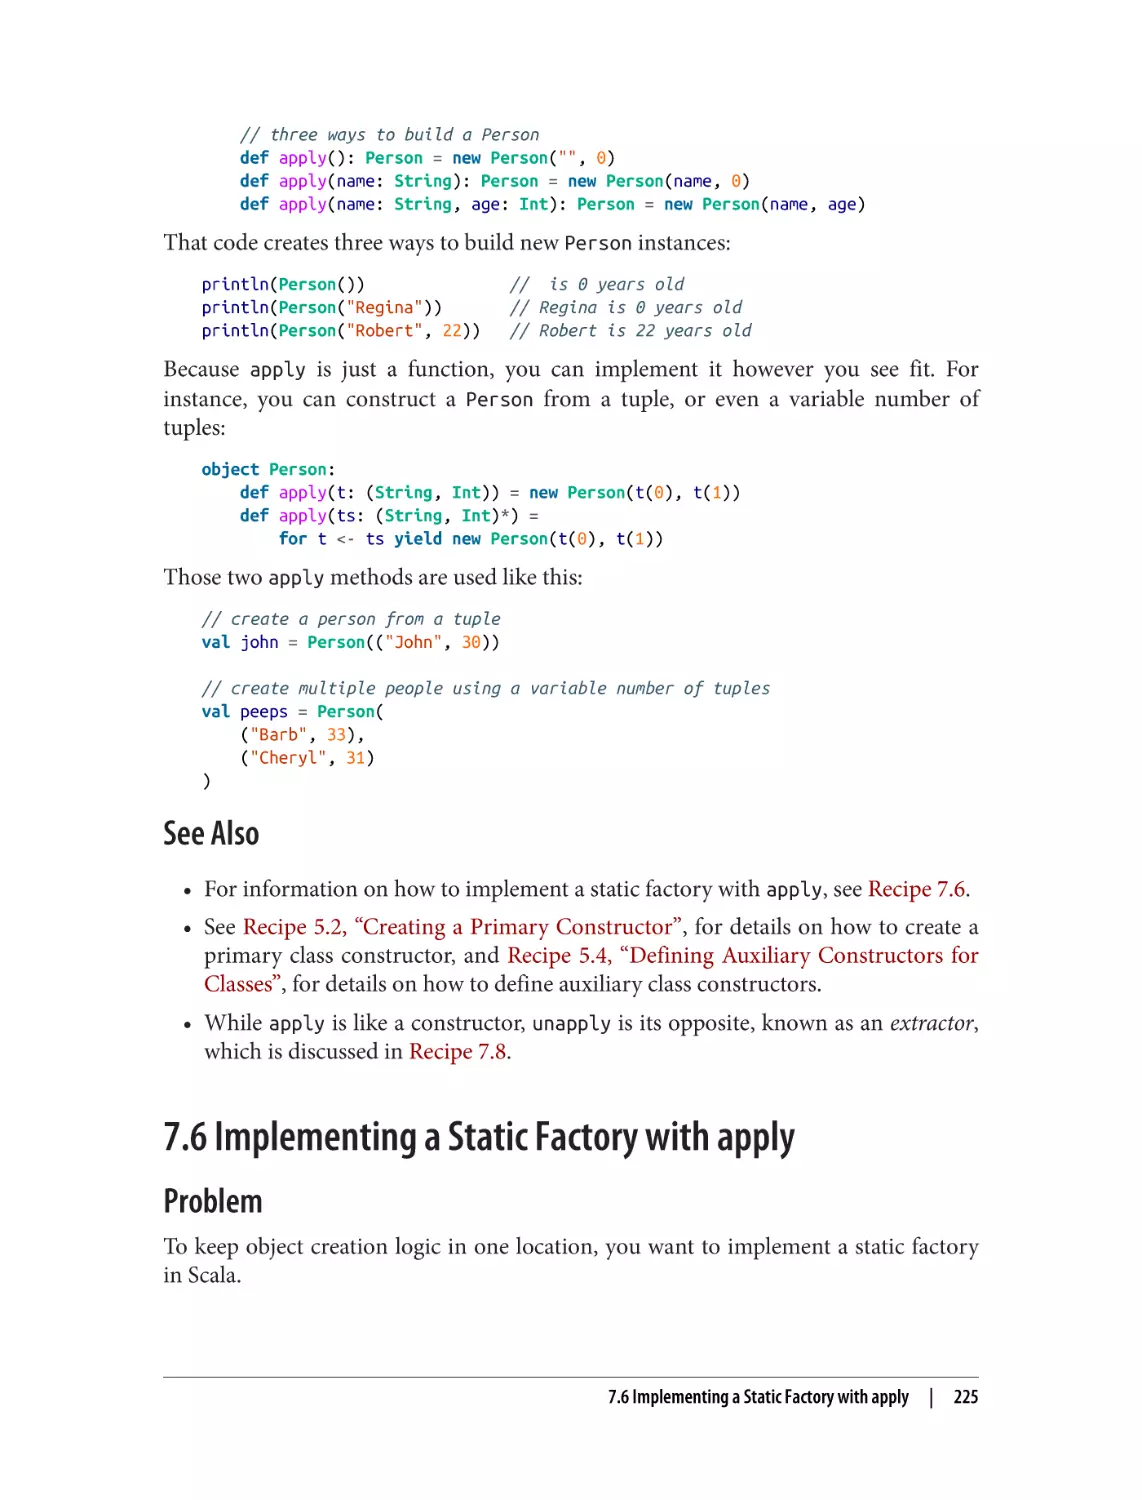 See Also
7.6 Implementing a Static Factory with apply
Problem